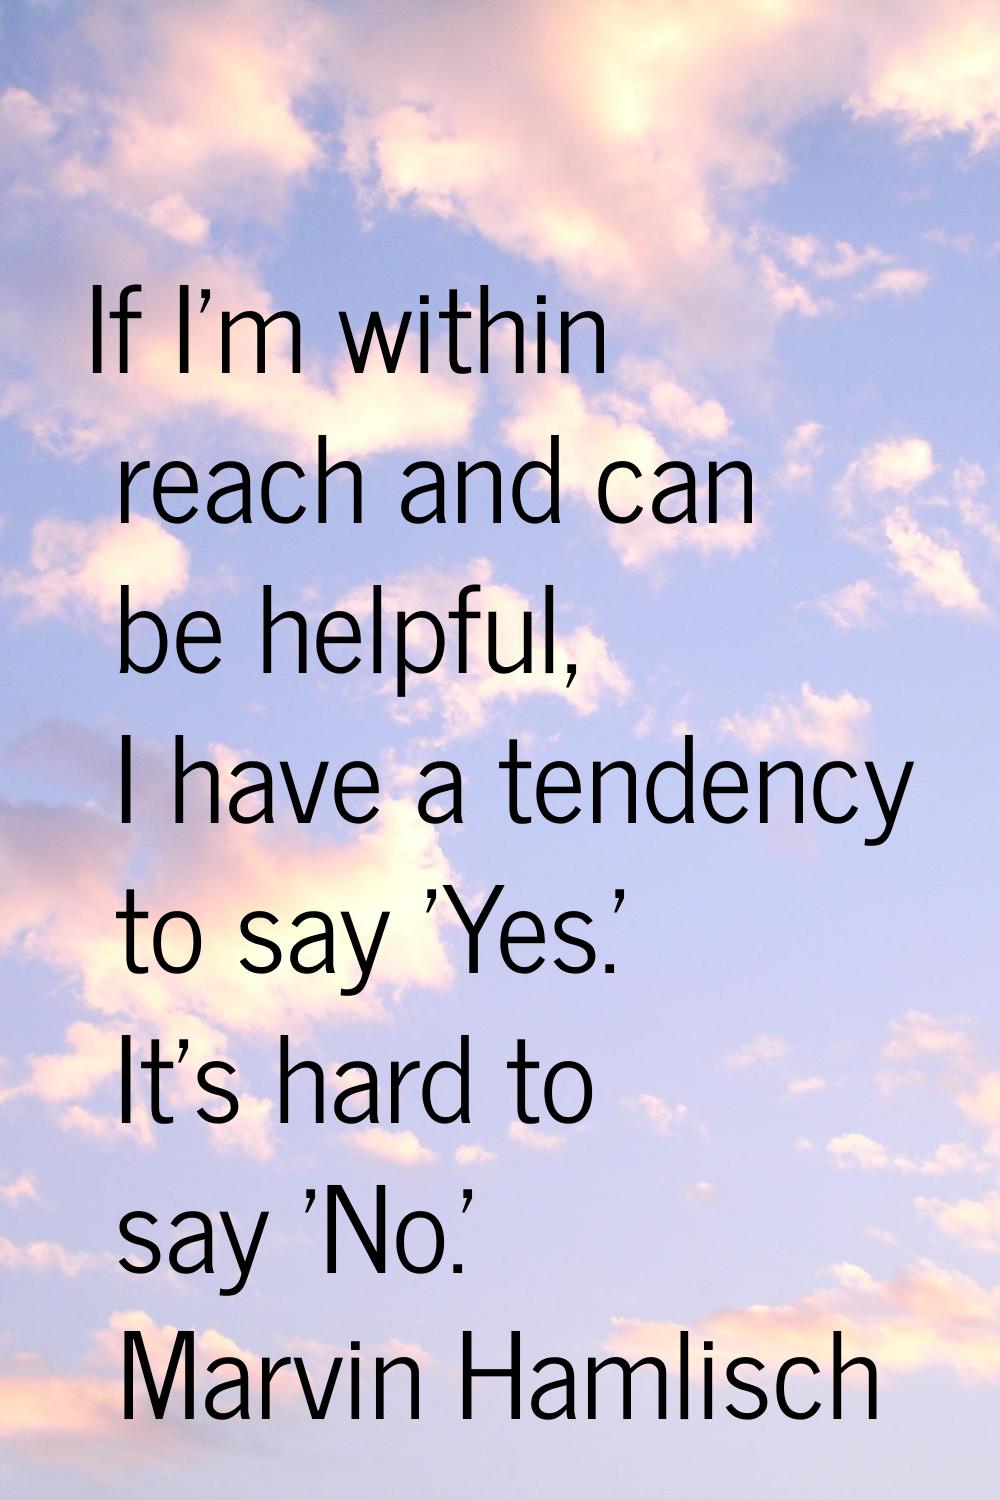 If I'm within reach and can be helpful, I have a tendency to say 'Yes.' It's hard to say 'No.'